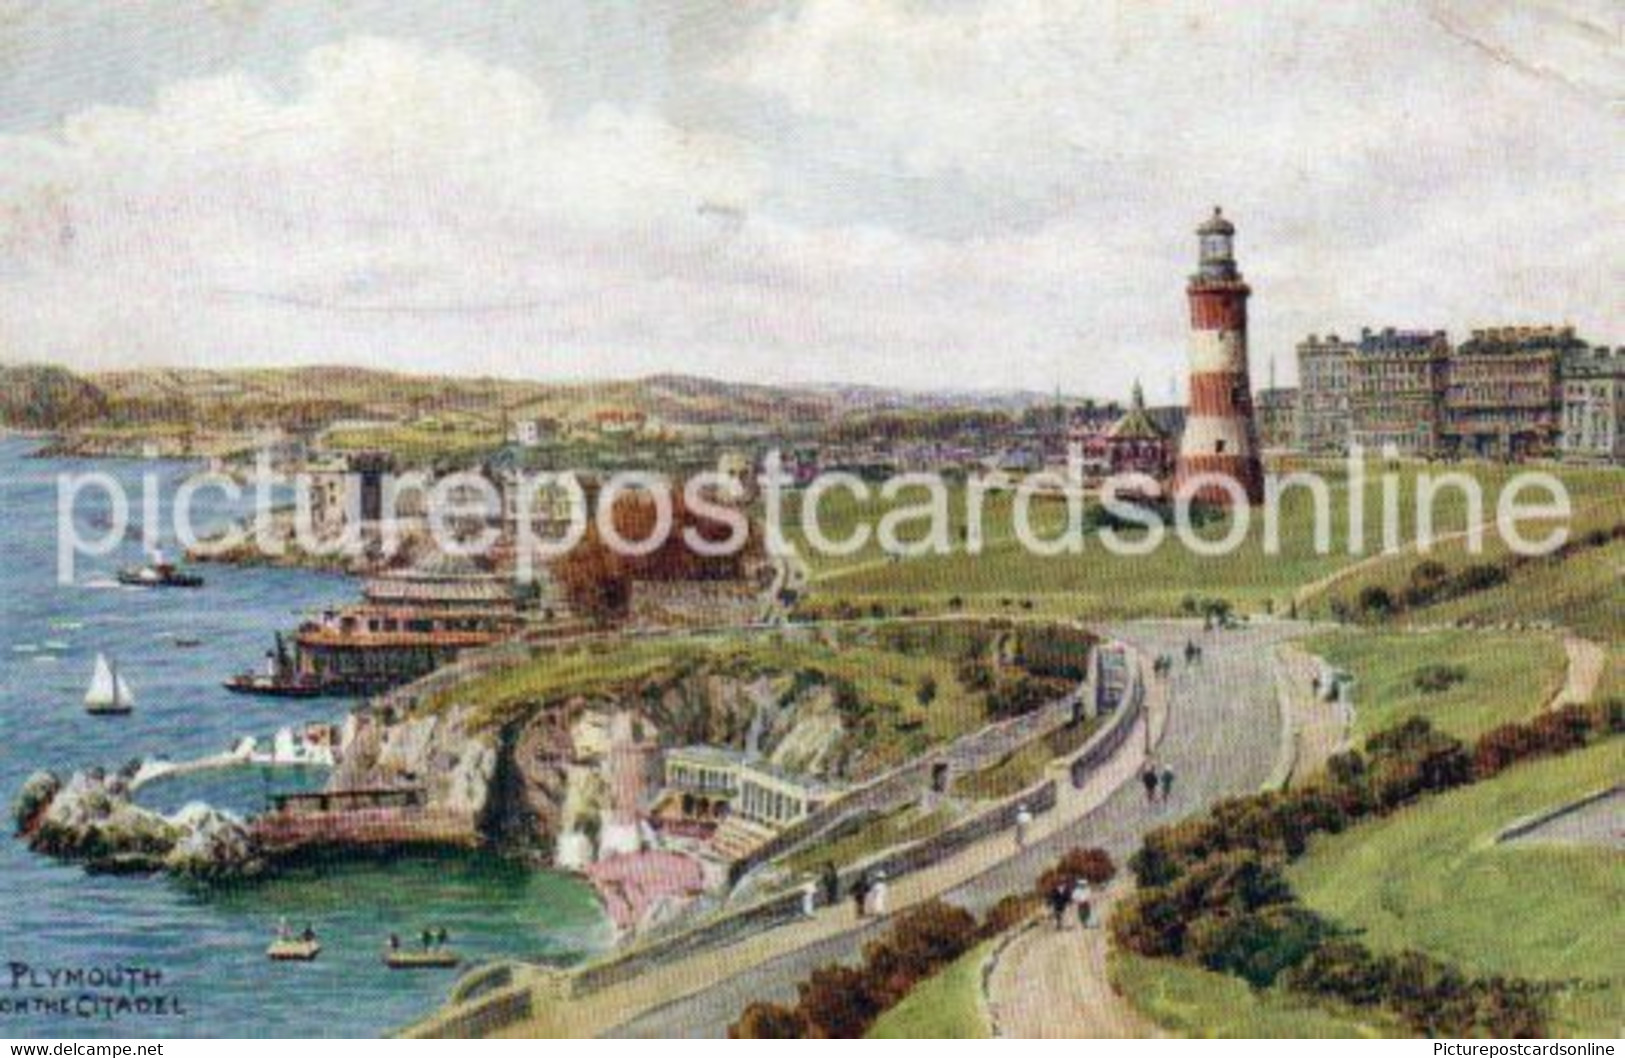 PLYMOUTH FROM THE CITADEL OLD COLOUR ART POSTCARD ARTIST SIGNED A.R. QUINTON SALMON 2402 - Quinton, AR